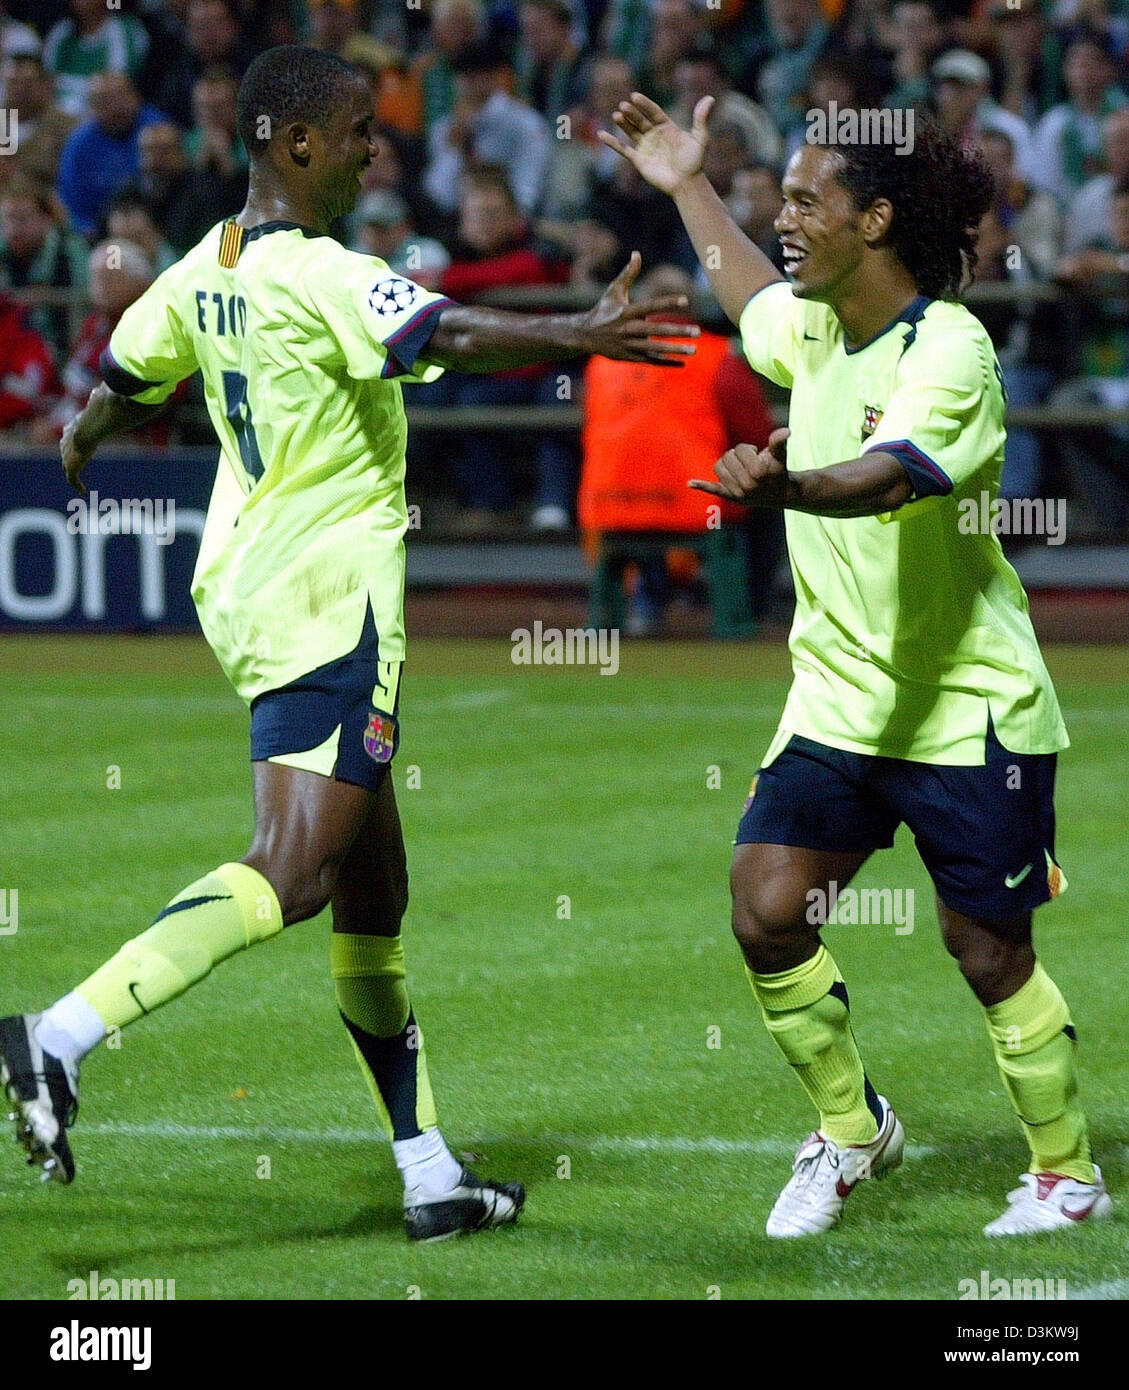 (dpa) - Player of Spanish soccer club FC Barcelona Samuel Eto'o (L) congratulates his team mate Ronaldinho (R) after scoring 2-0 by penalty kick during the the first leg of the UEFA Champions League SV Werder Bremen vs FC Barcelona at the Weser stadium in Bremen, Germany, Wednesday 14 September 2005. German Bundesliga club Werder Bremen lost  0-2 against the Spanish Champion. Photo Stock Photo